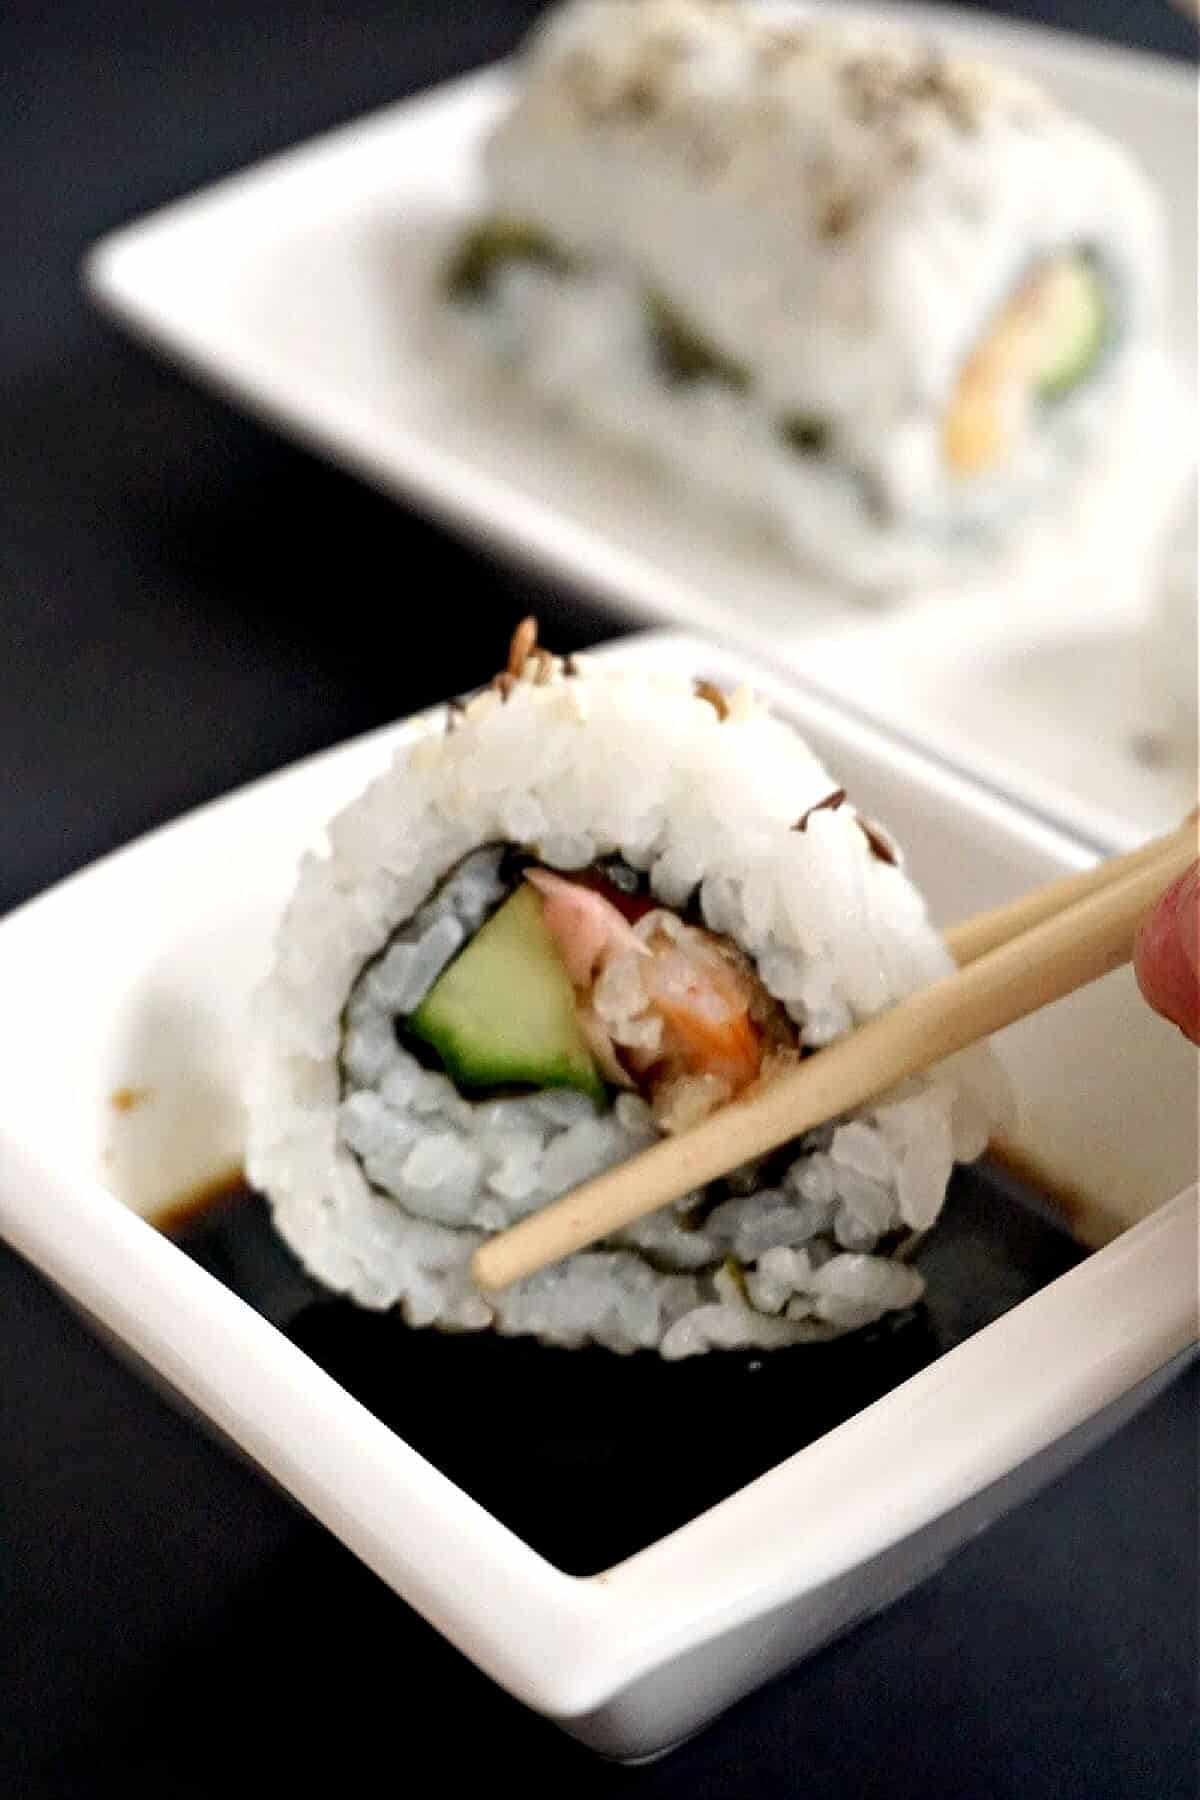 A sushi roll being dipped into sauce.